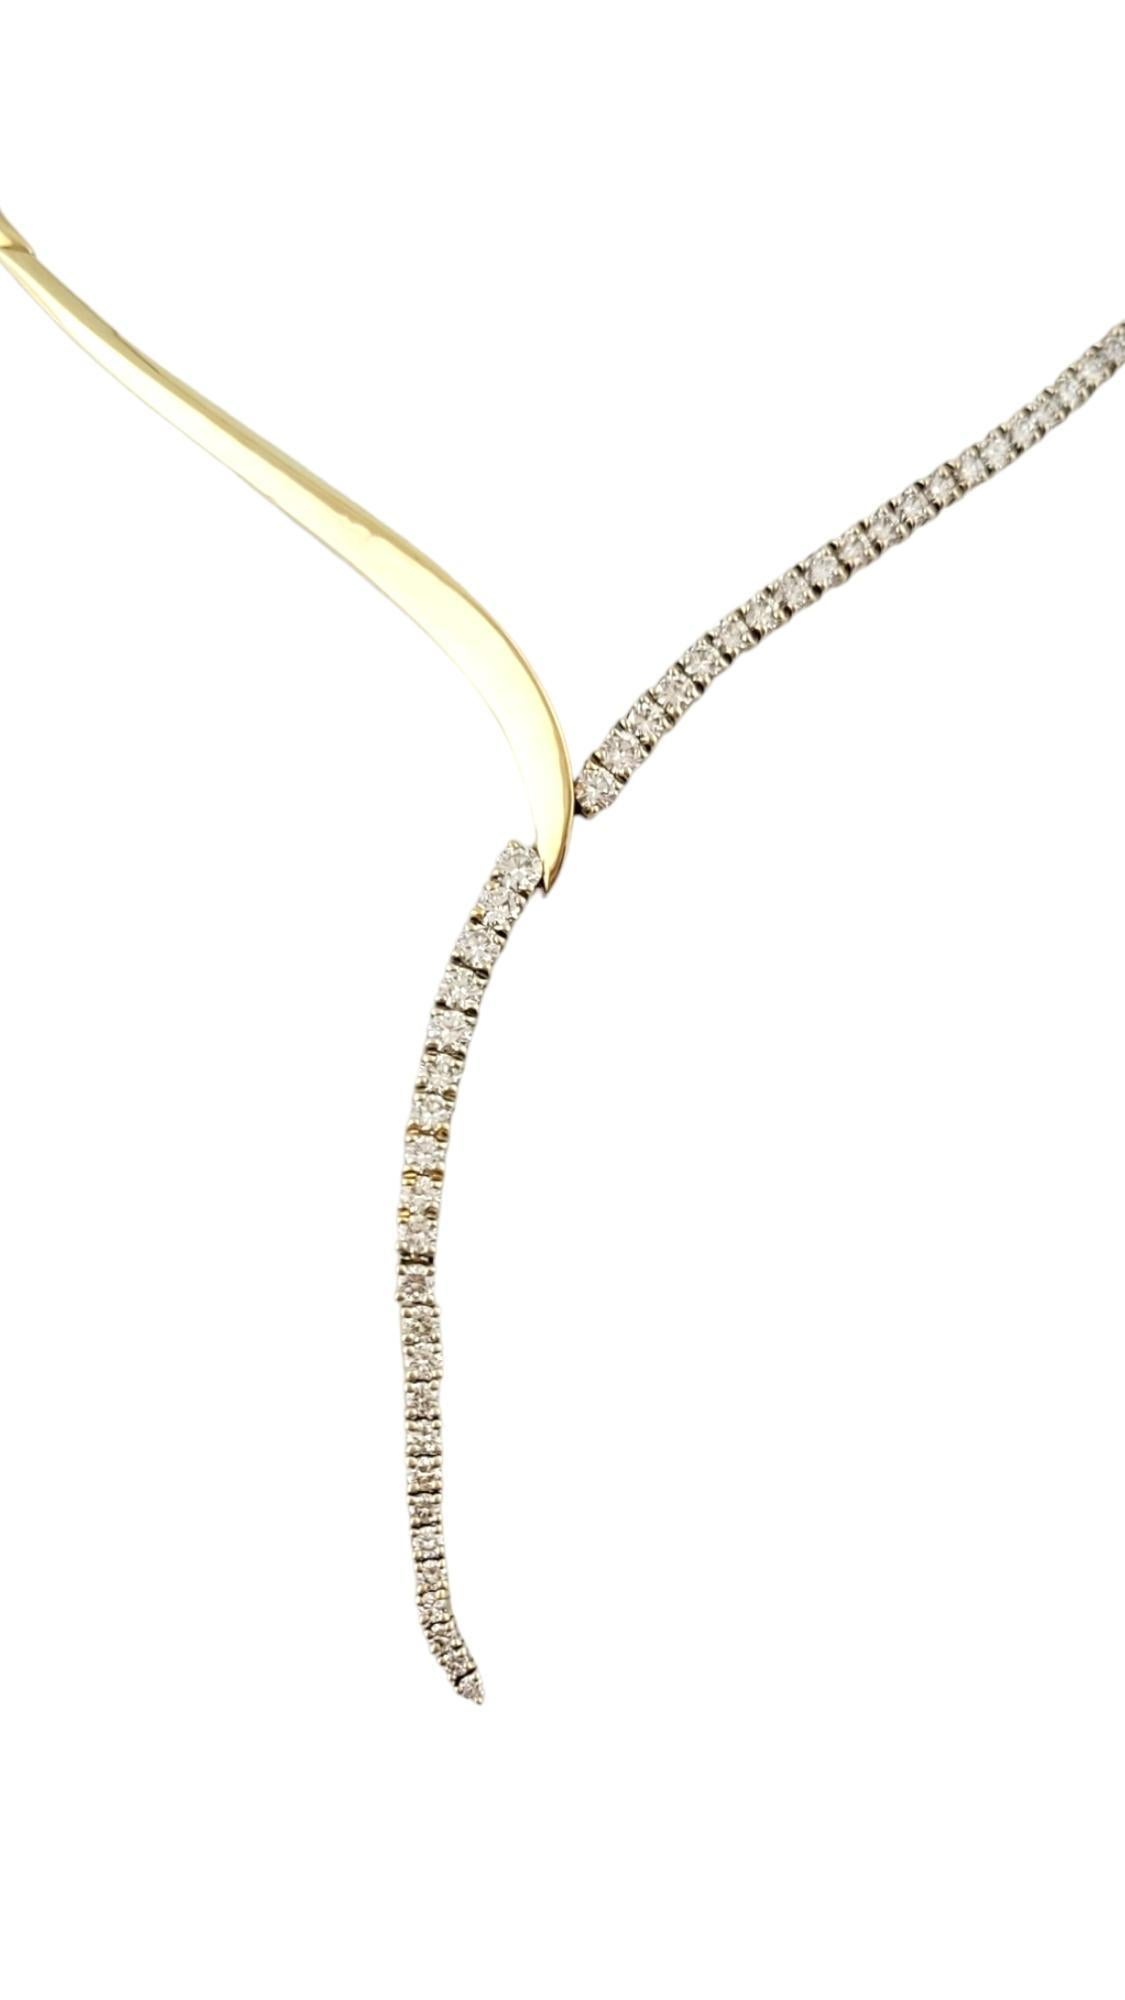 This spectacular drop necklace features 44 round brilliant cut diamonds set in beautifully detailed 14K yellow gold.

Approximate total diamond weight: 1.25 ct.

Diamond color:  G

Diamond clarity:  VS1

Size:  16 inches  (drop: 3 inches)

Weight: 